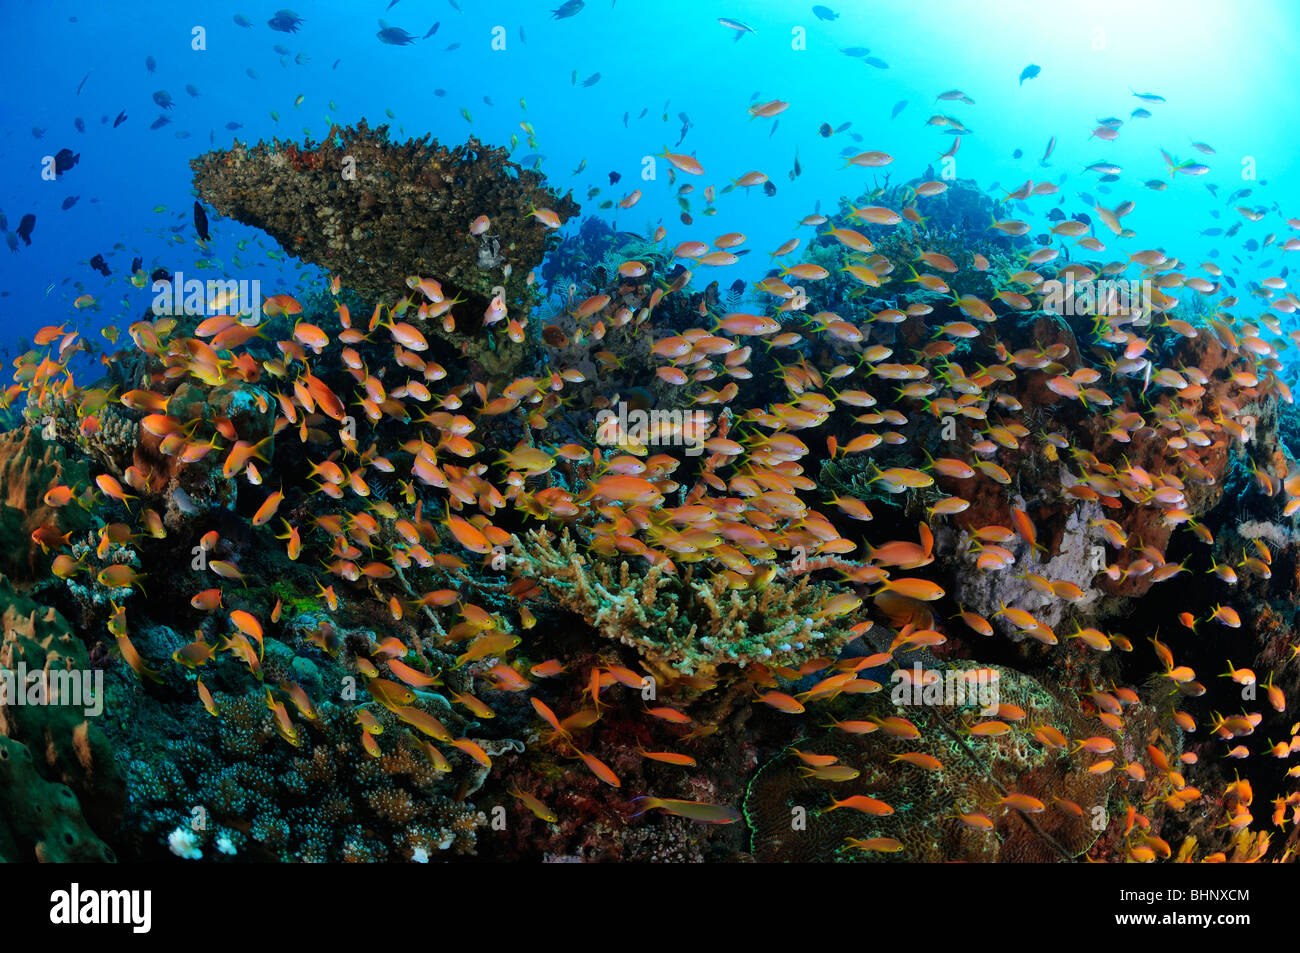 Pseudanthias bicolor, coral reef with school of Yellow-back basslets, Bali Stock Photo